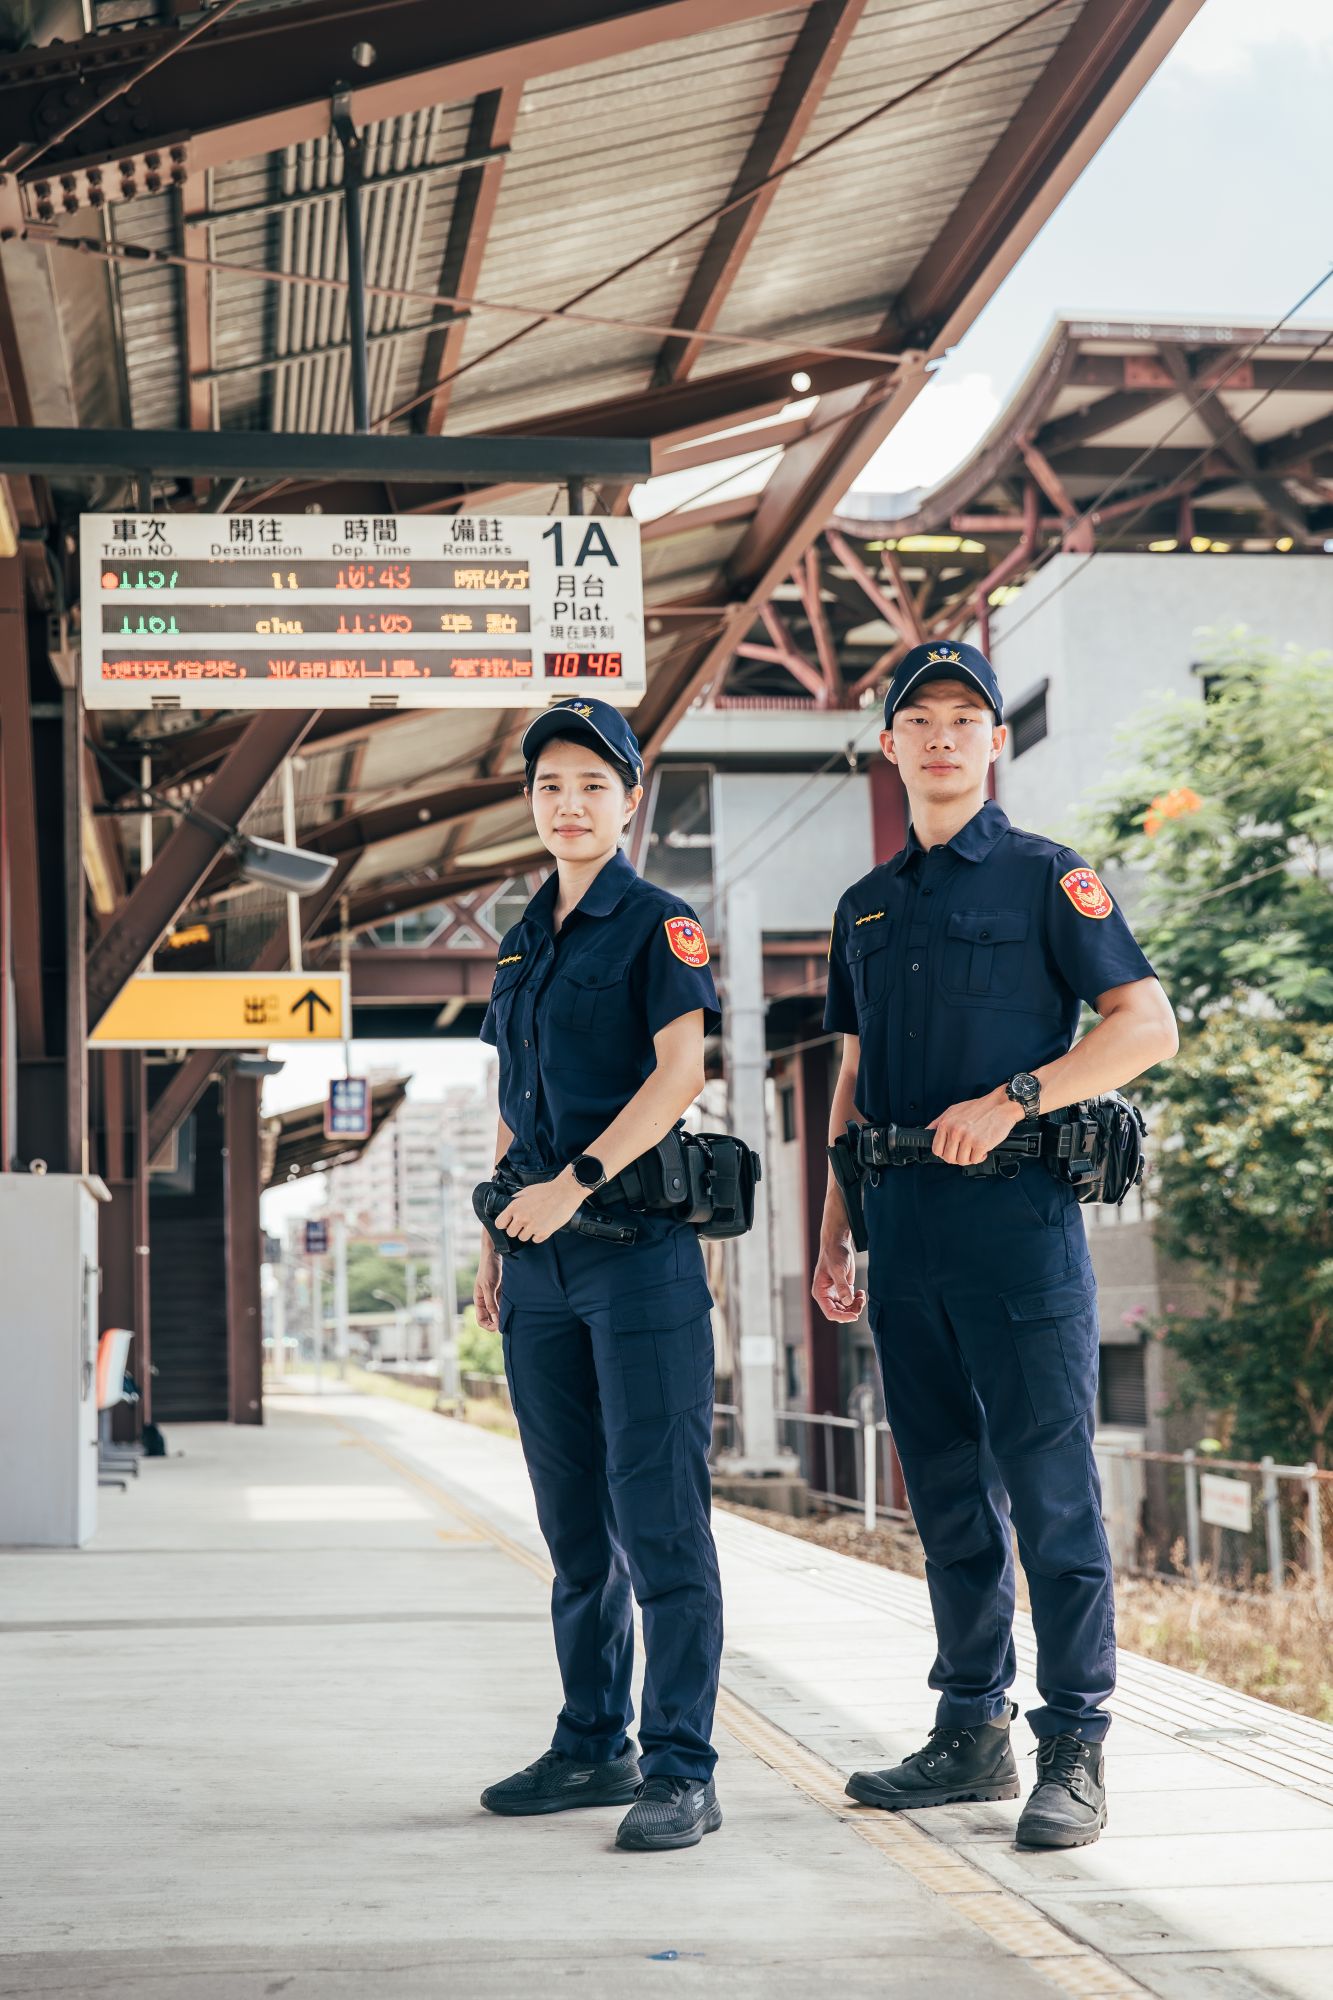 Security at trains and stations